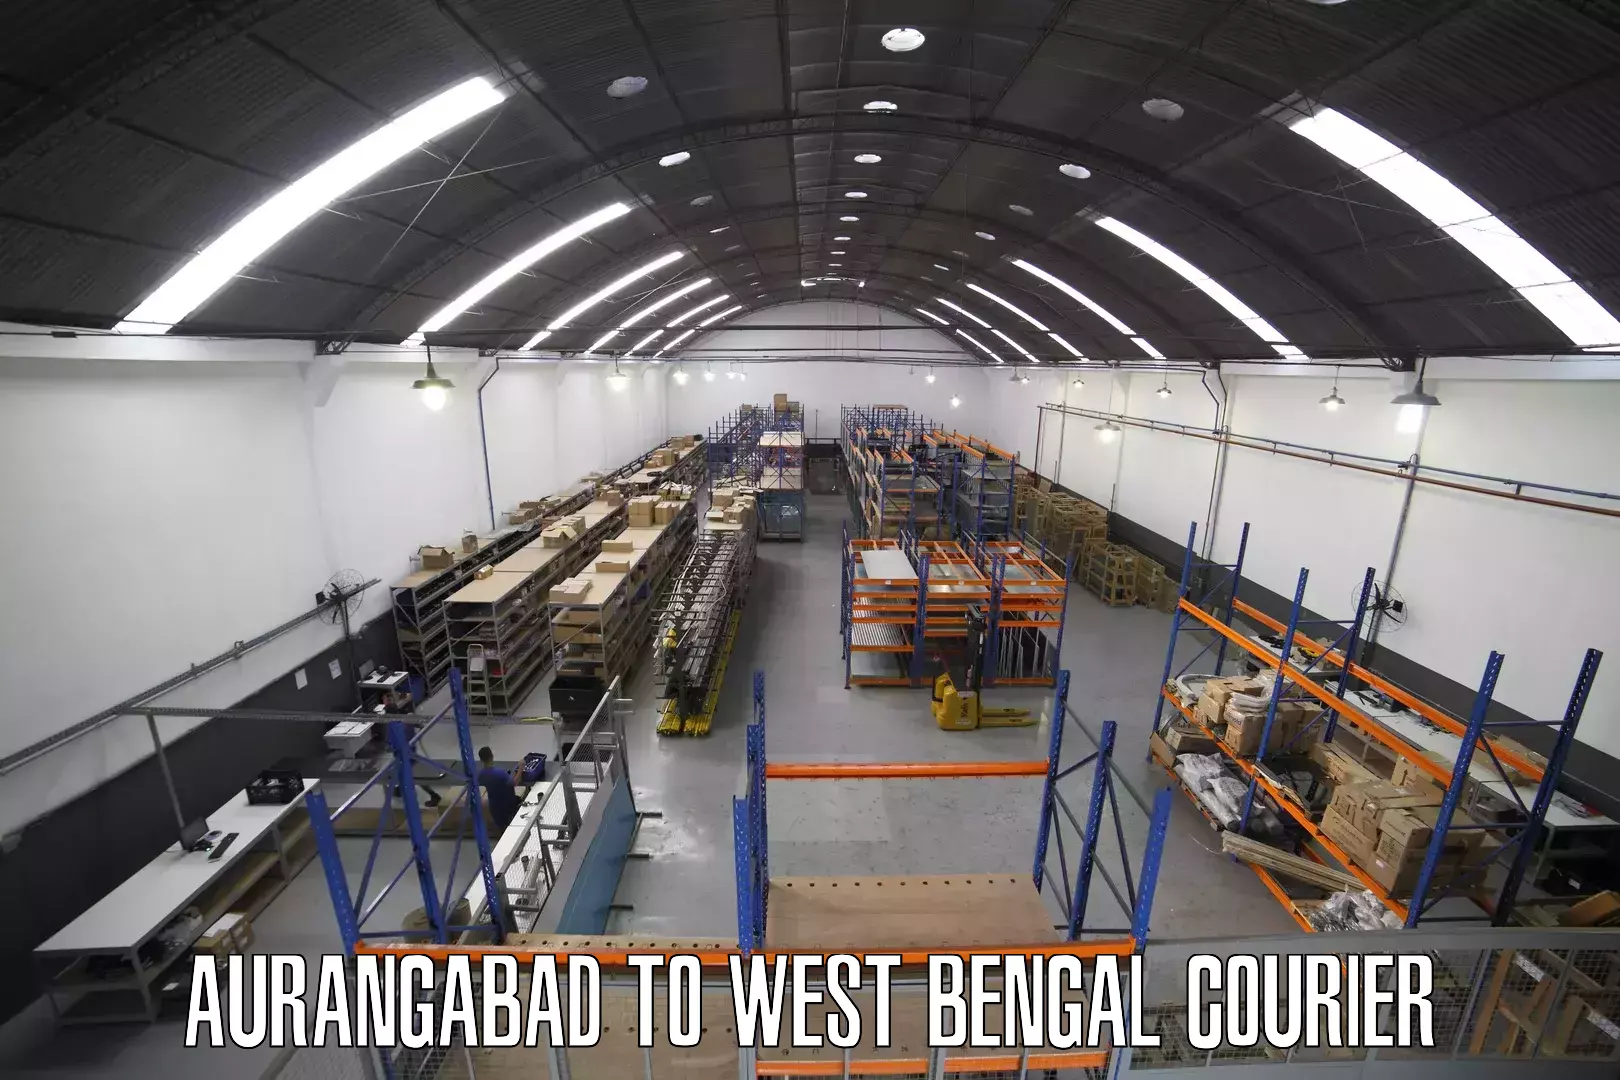 Express delivery capabilities Aurangabad to West Bengal